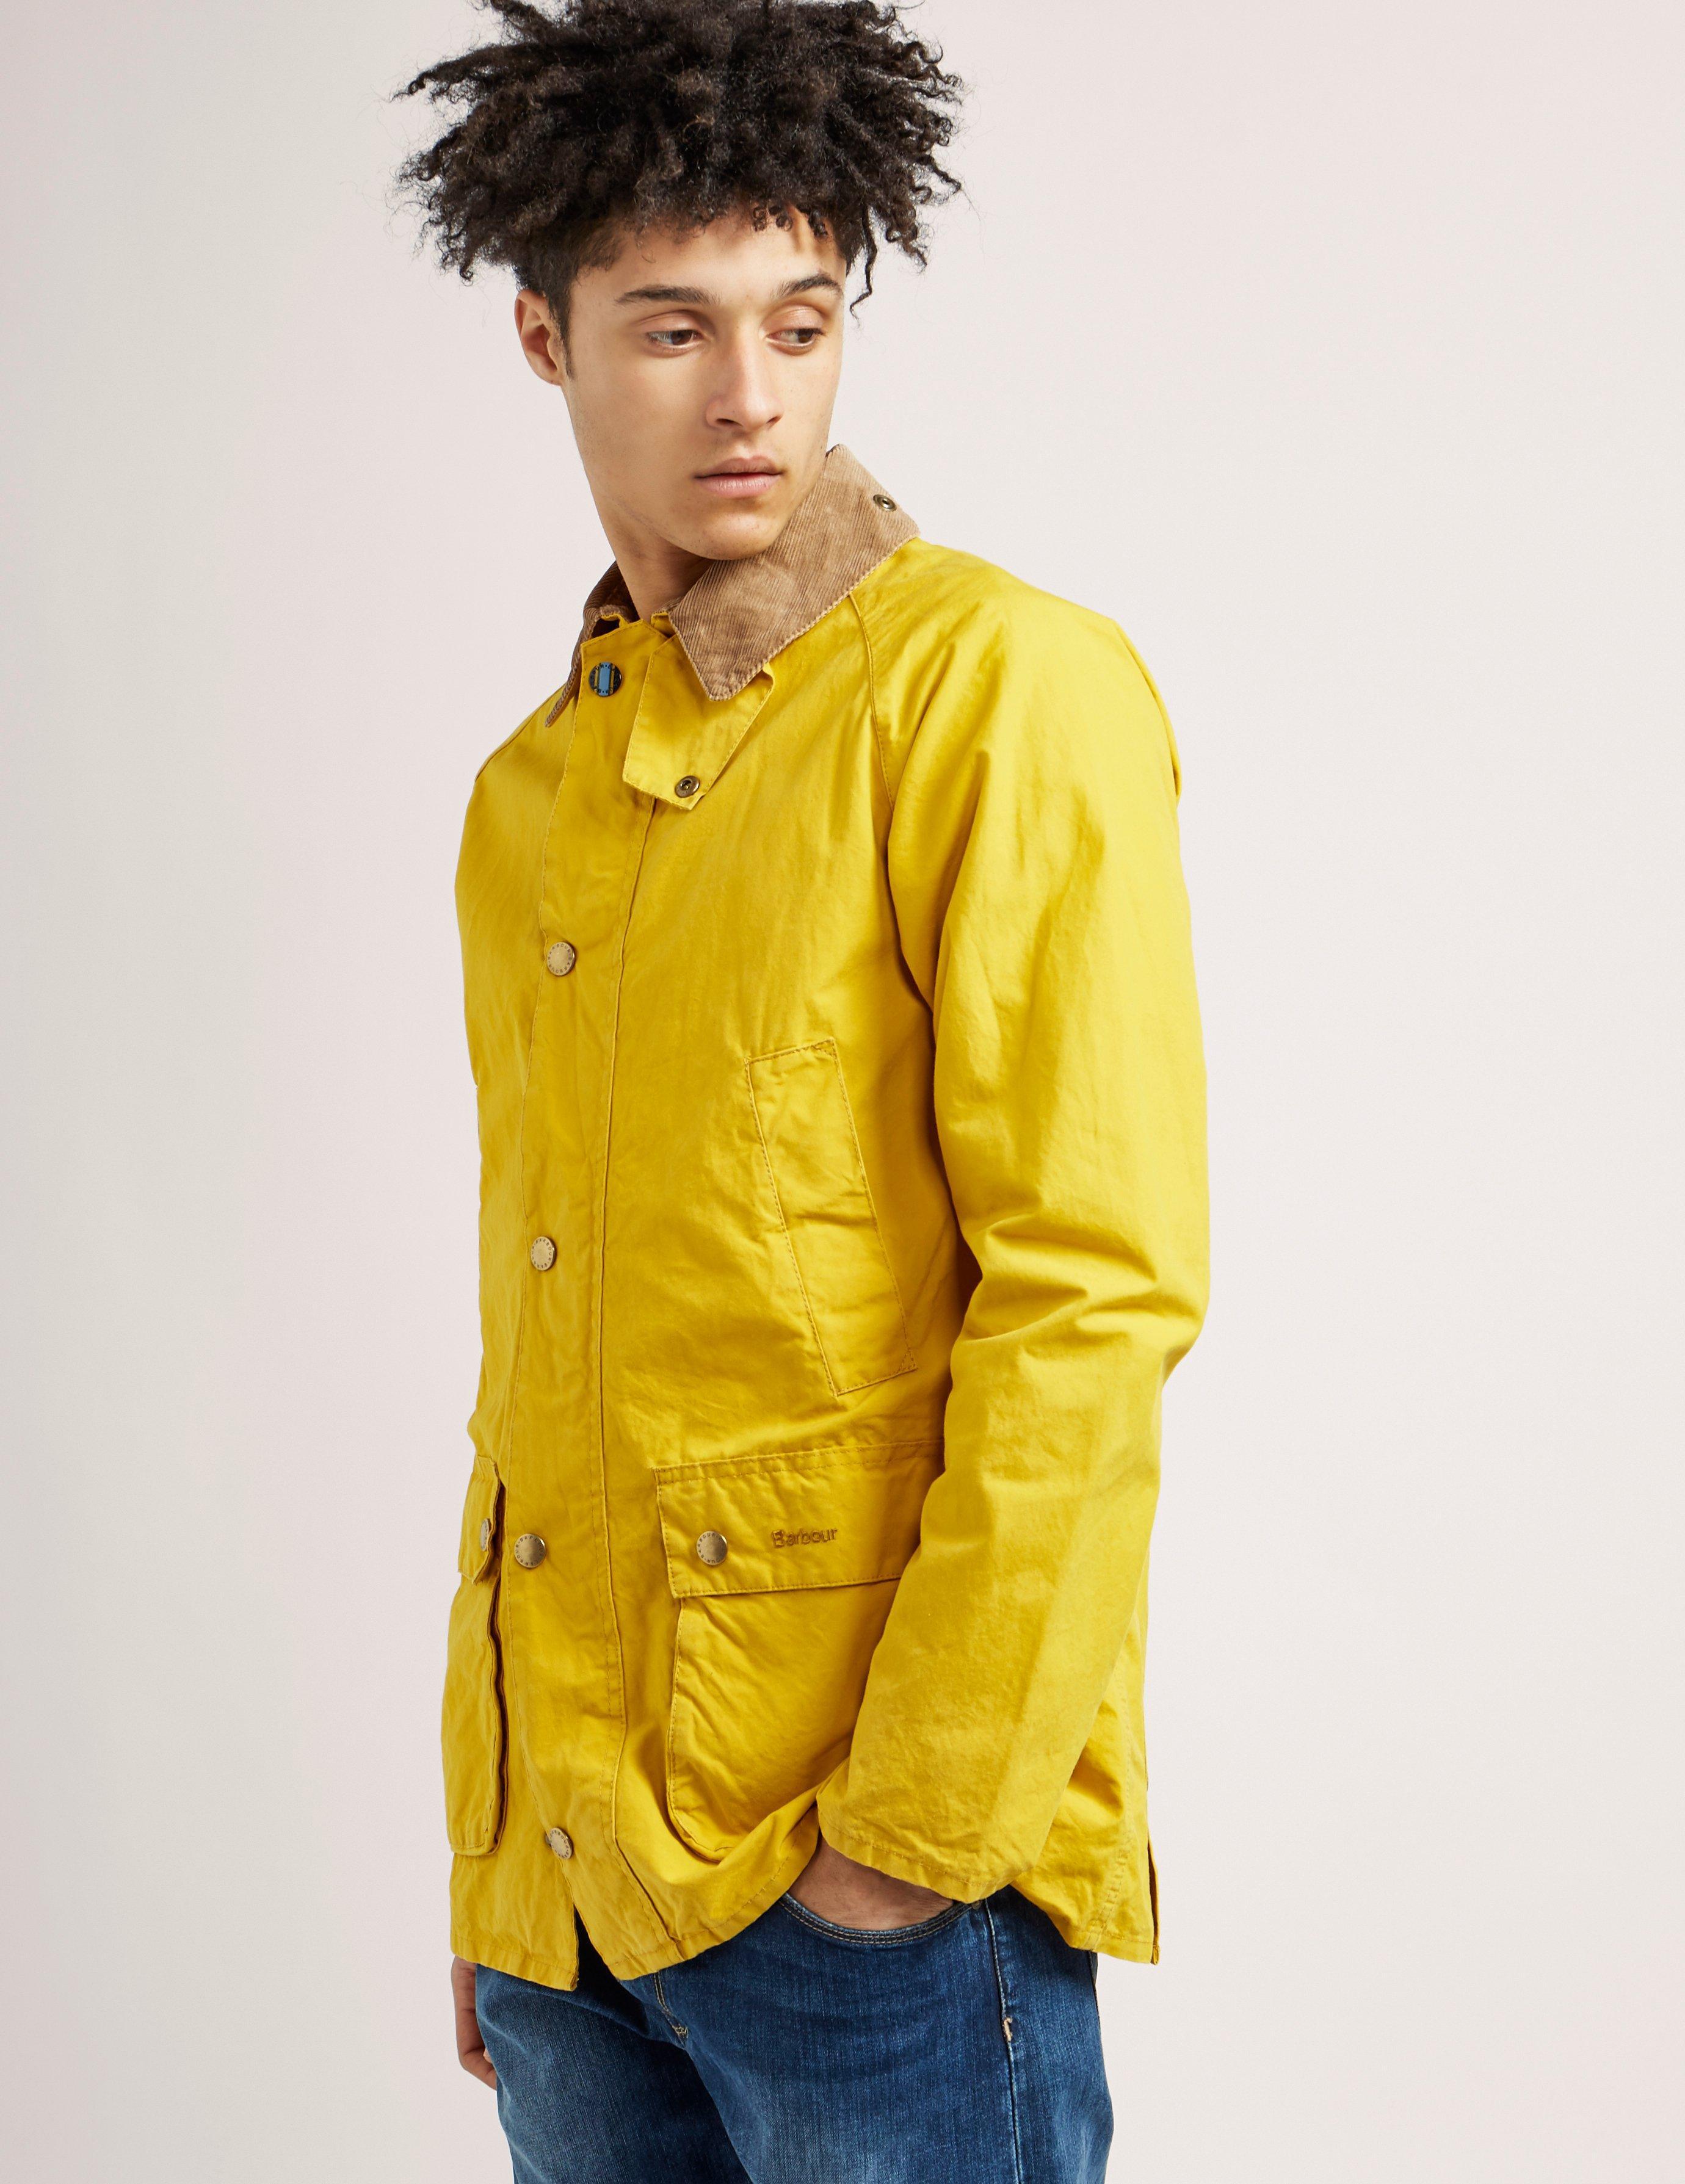 Barbour Bedale Jacket in Yellow for Men - Lyst